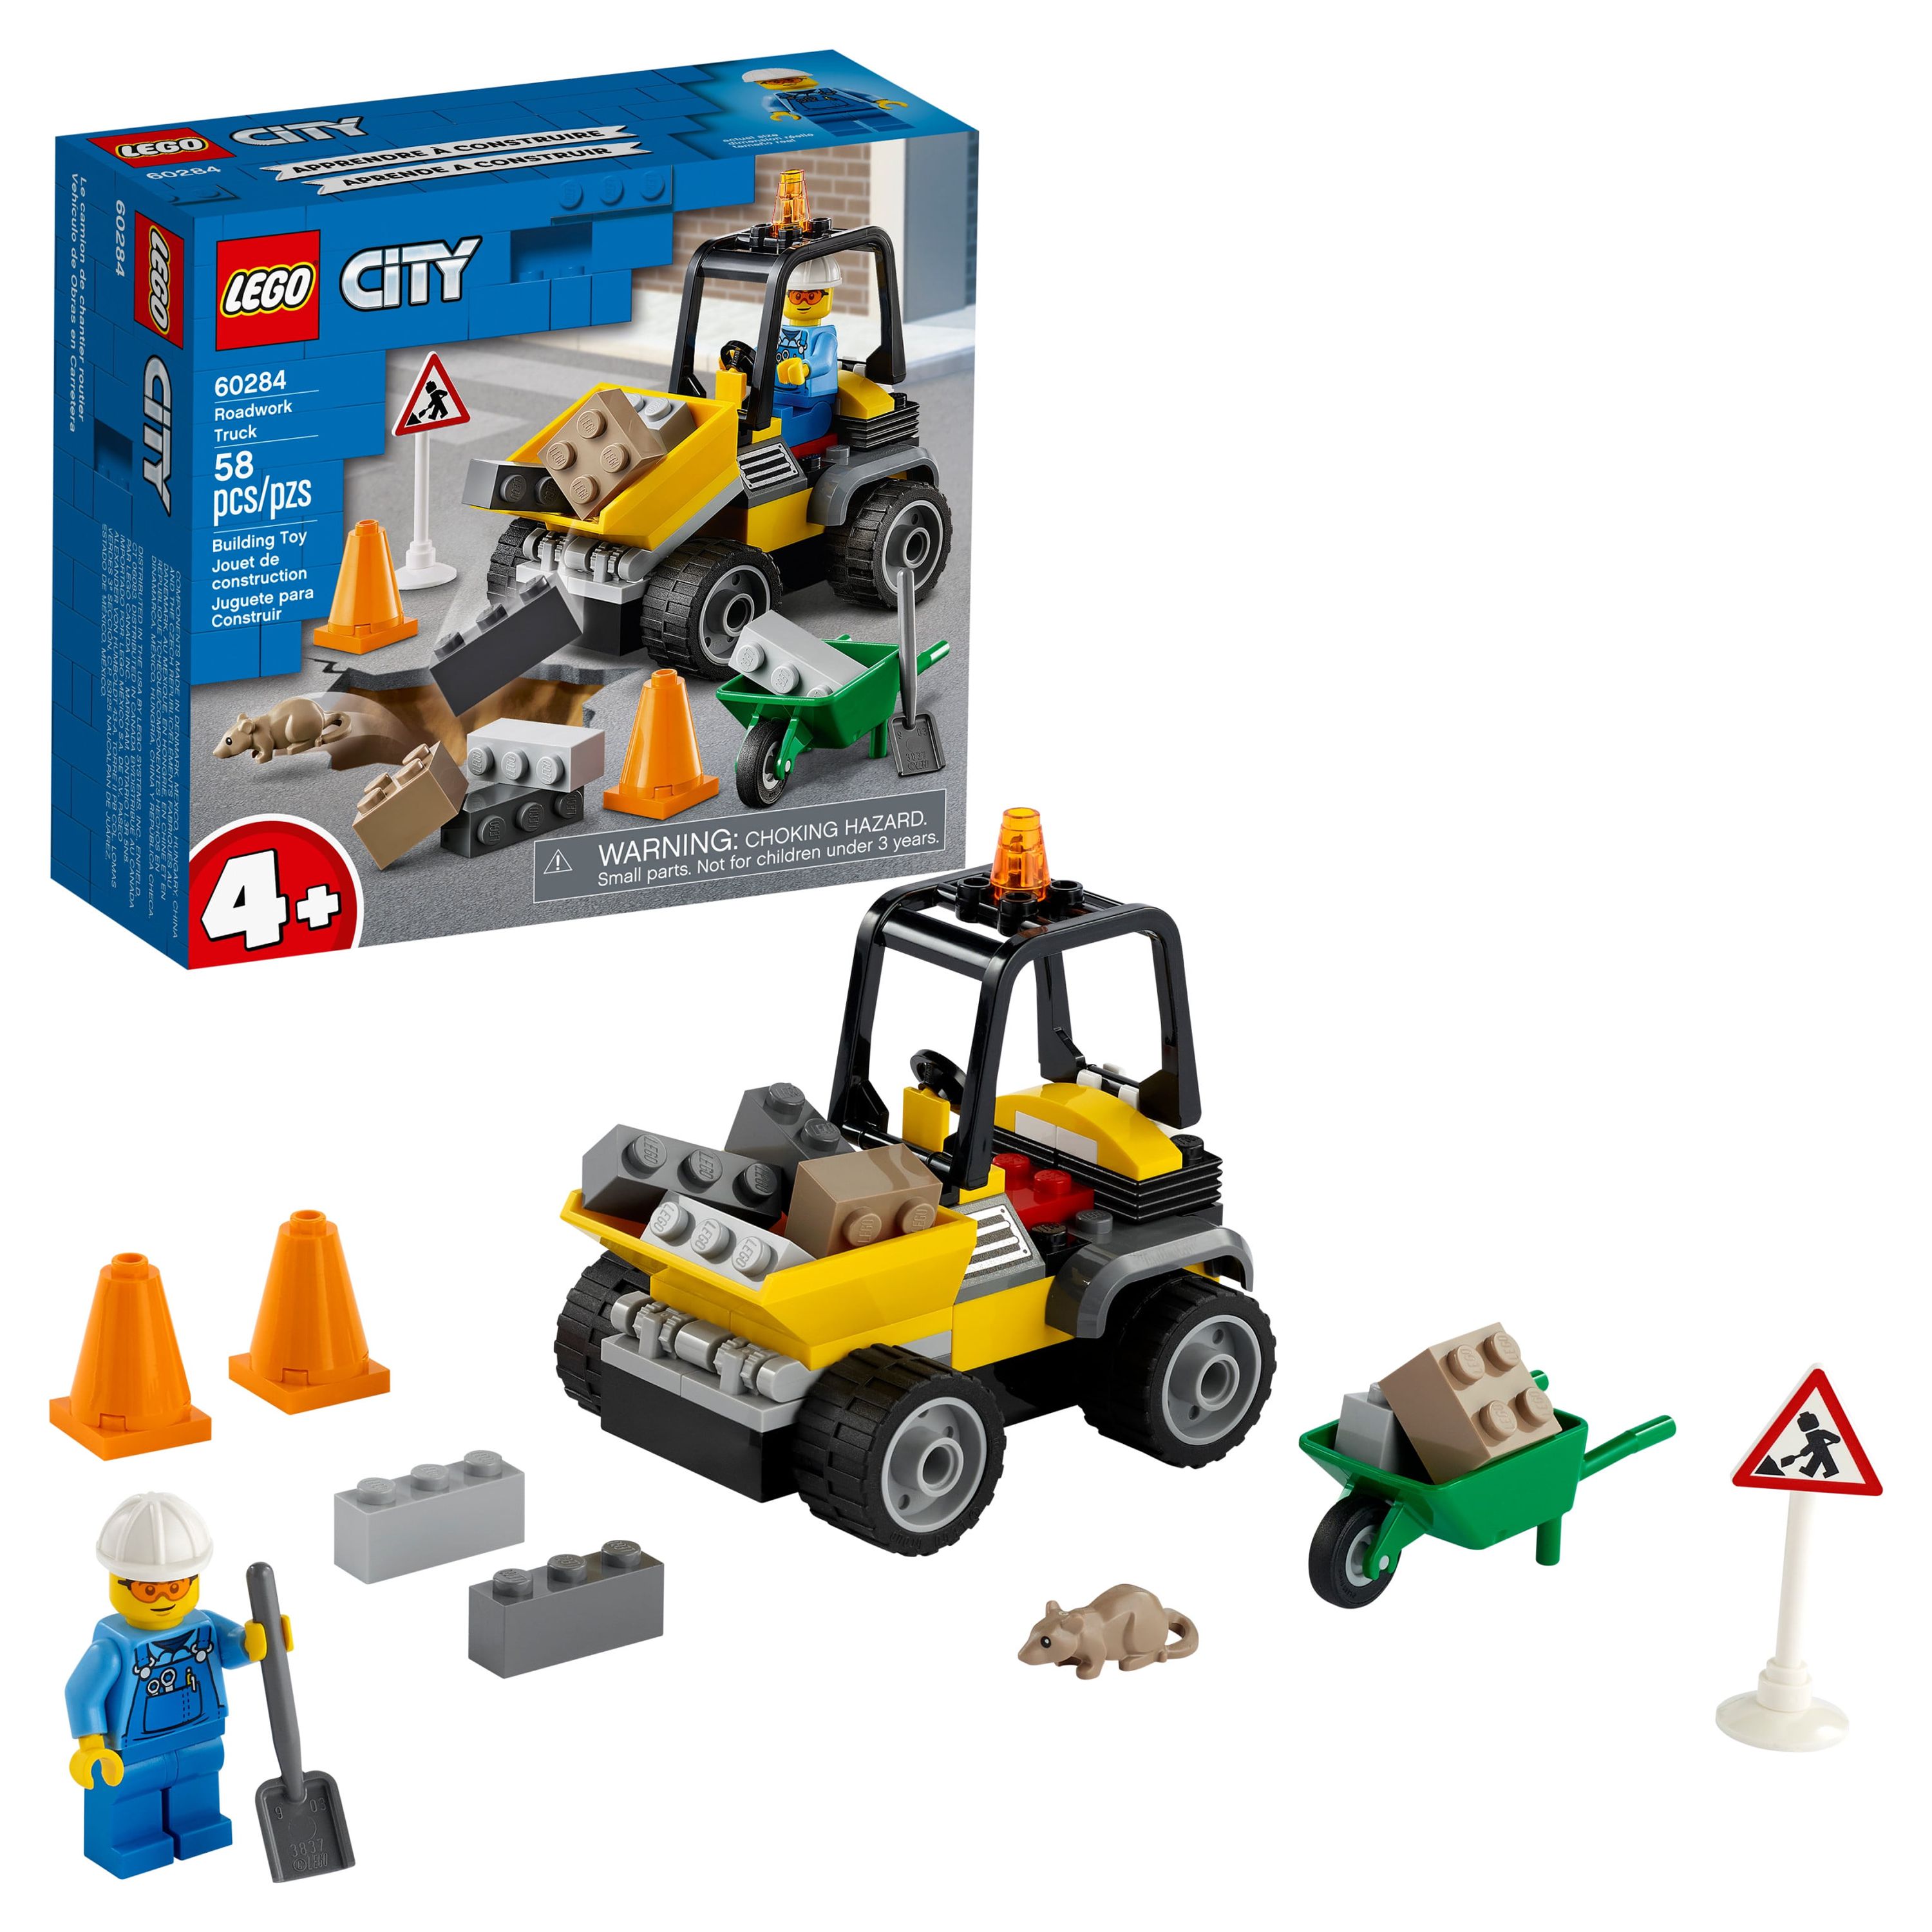 LEGO City Roadwork Truck 60284 Building Toy; Cool Roadworks Construction Set for Kids (58 Pieces) - image 1 of 7